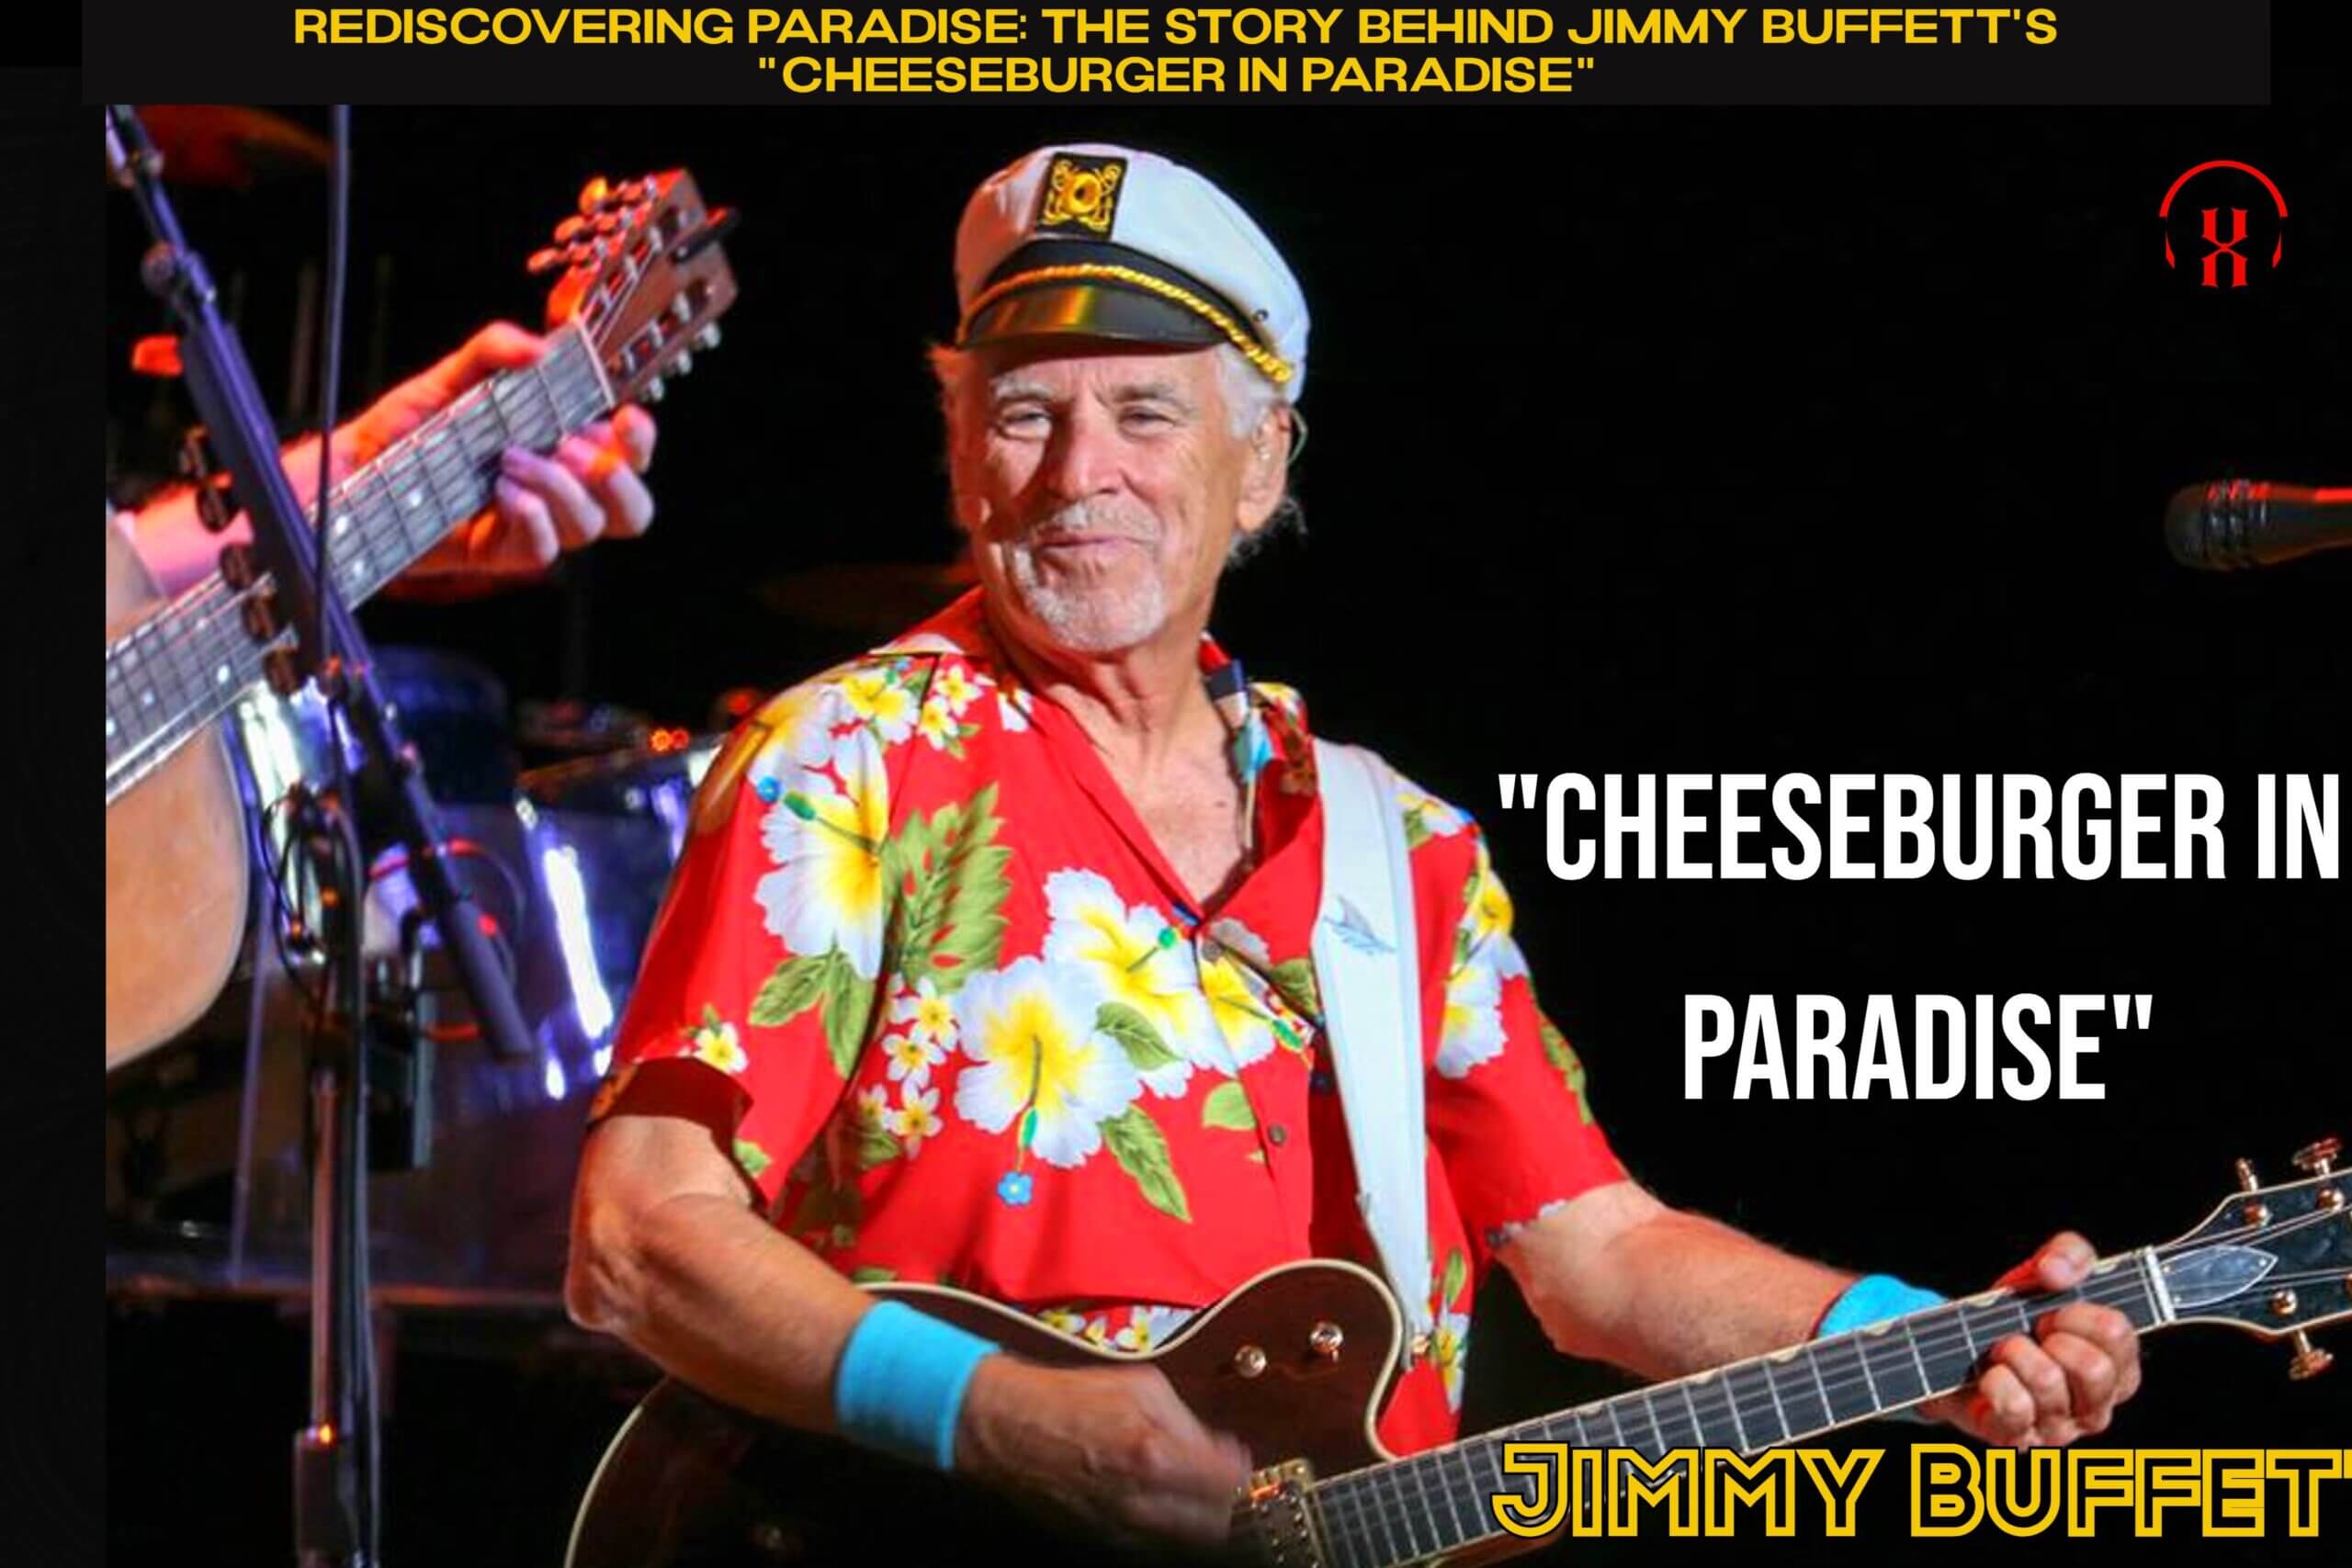 Rediscovering Paradise: The Story Behind Jimmy Buffett’s “Cheeseburger in Paradise”